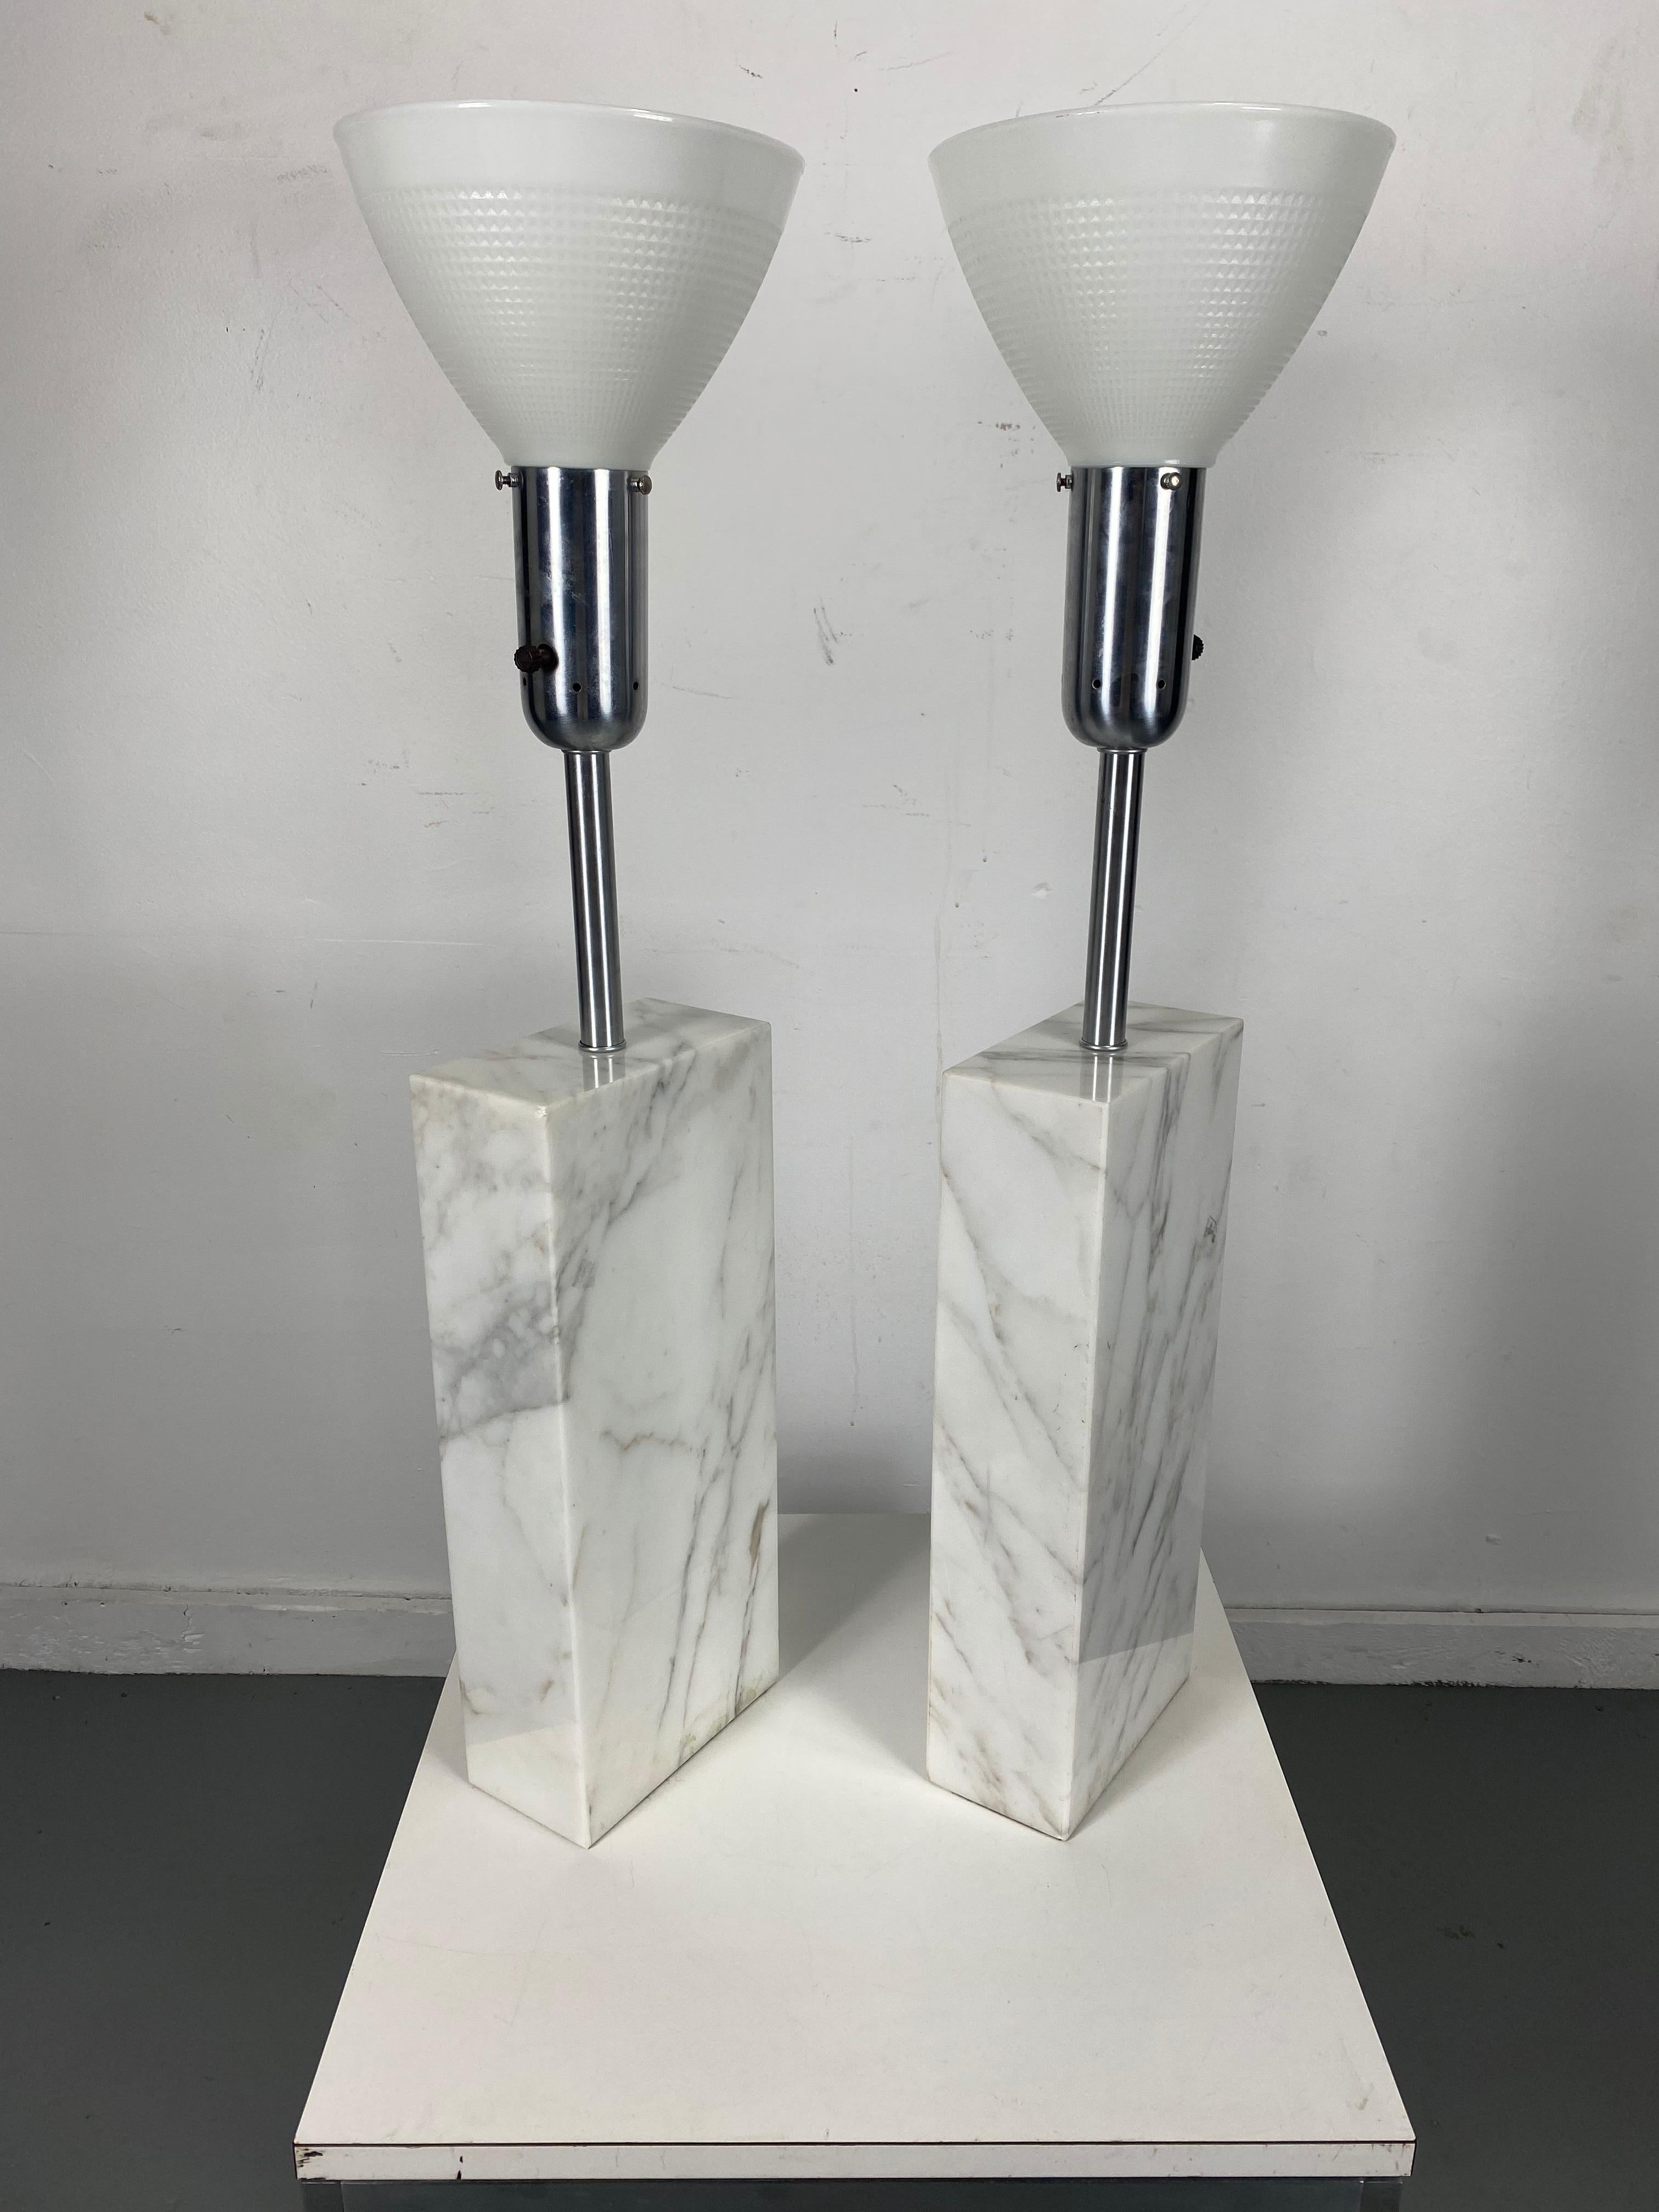 Substantial Elizabeth Kauffer attributed Nessen Studios solid white carrara marble & brushed steel lamps, 1950s. Featuring a solid, architectural, white and gray veined marble rectangular column, Brushed steel neck and socket with (6 H x 8 D) White